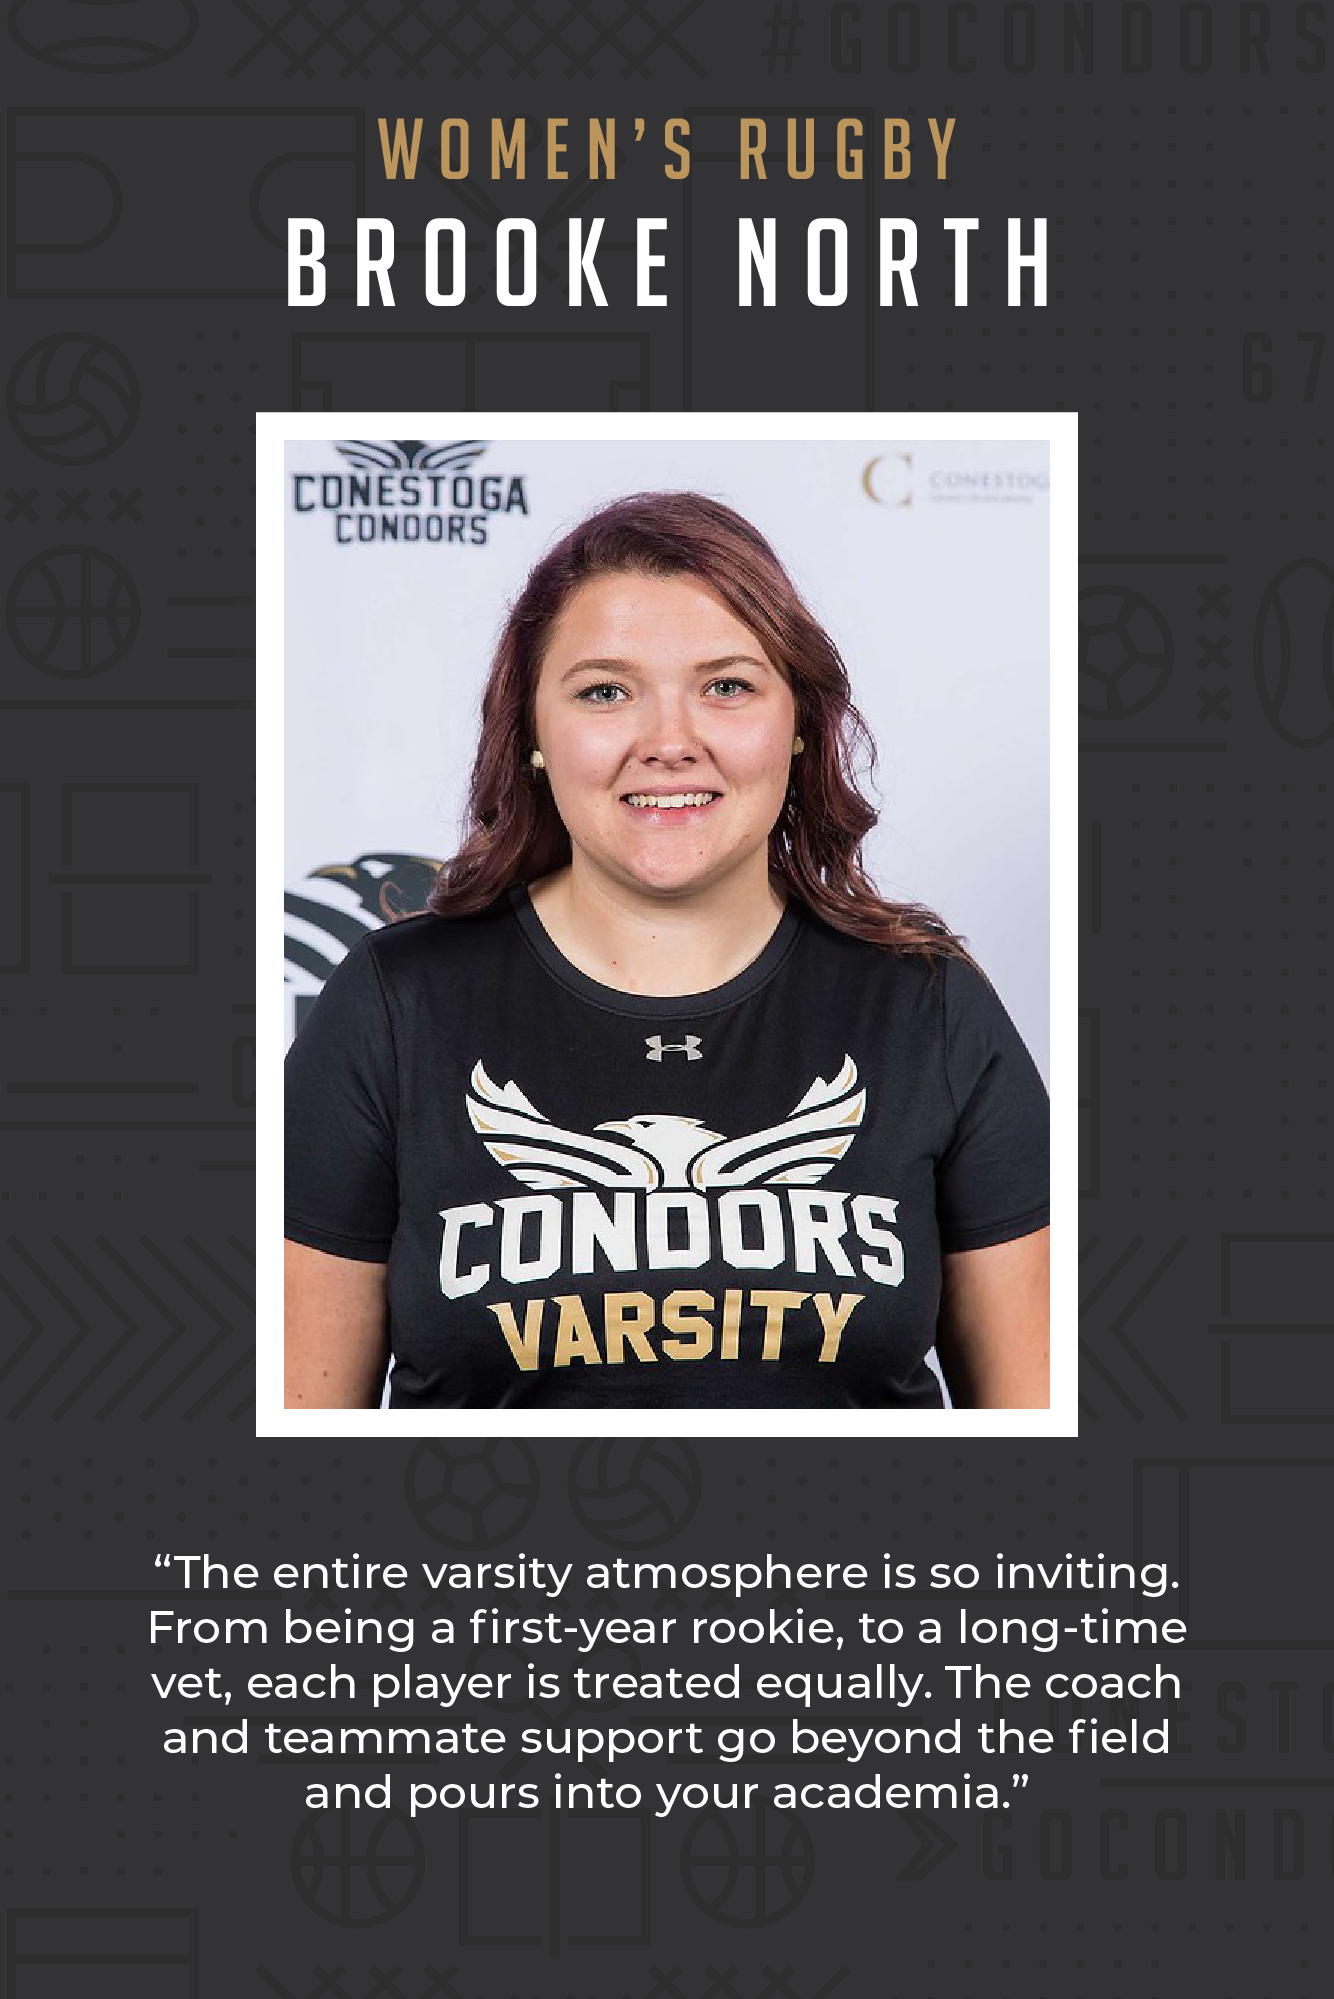 Varsity athlete Brooke's Testimonial about the inviting atmosphere, player equality and coach & teammate support both on the field and in academia.